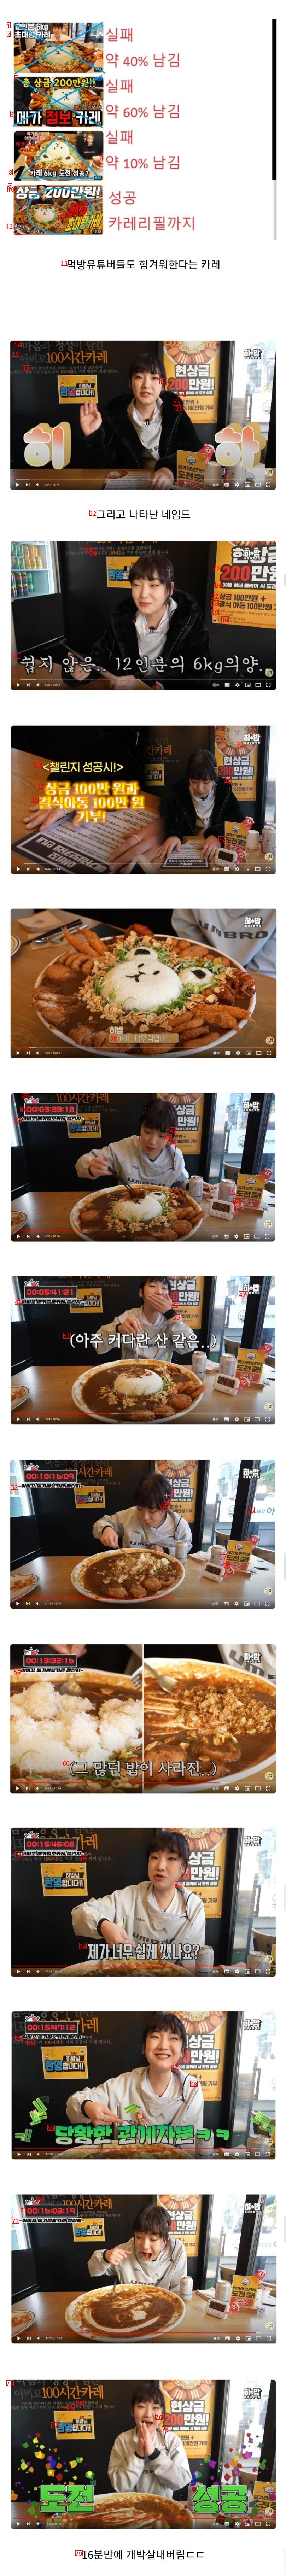 A reward of 2 million won for curry, which even mukbang YouTubers are struggling